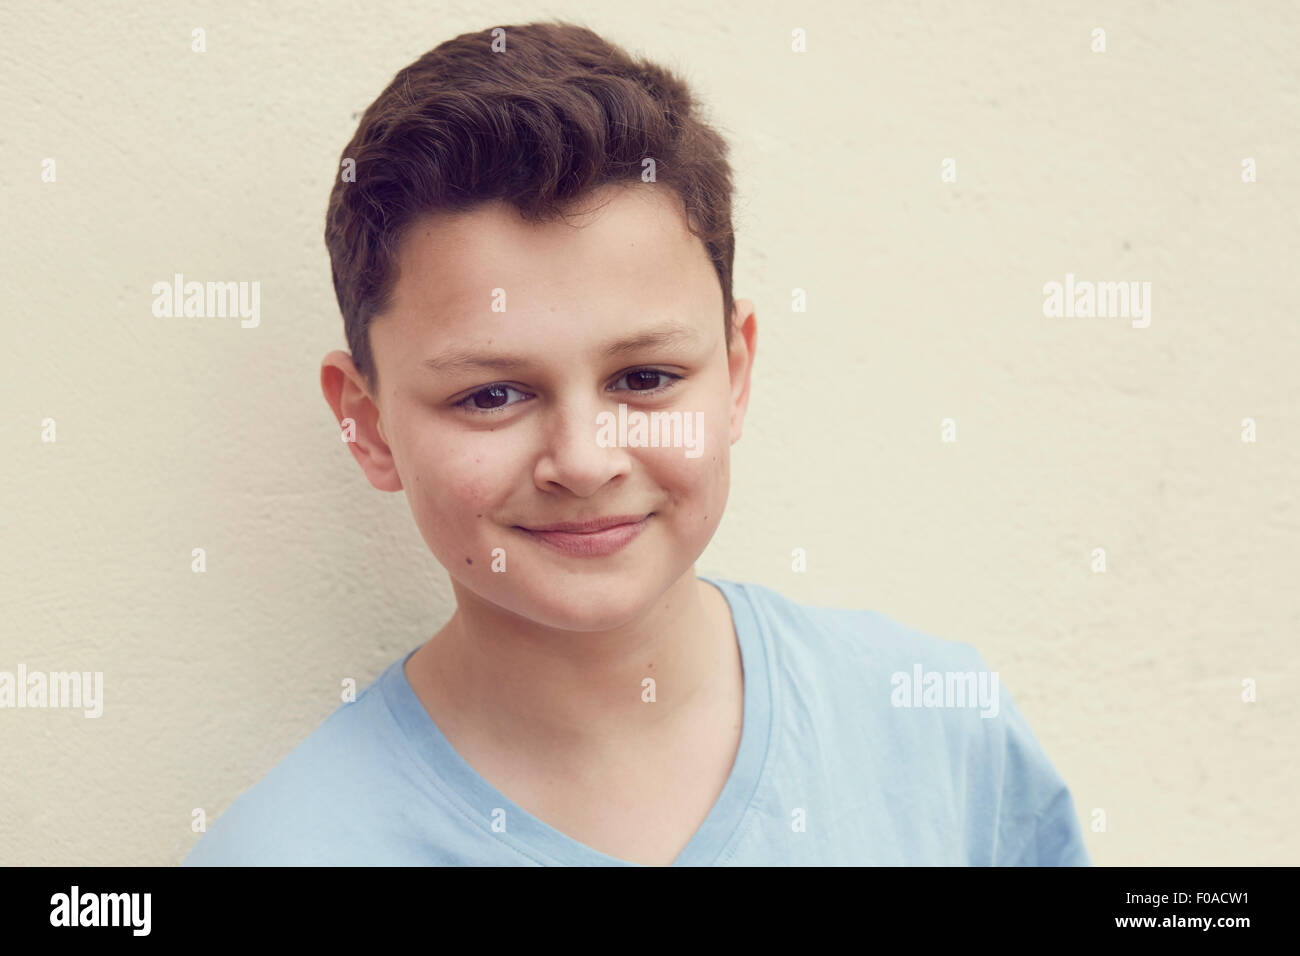 Portrait of boy in front of wall Stock Photo